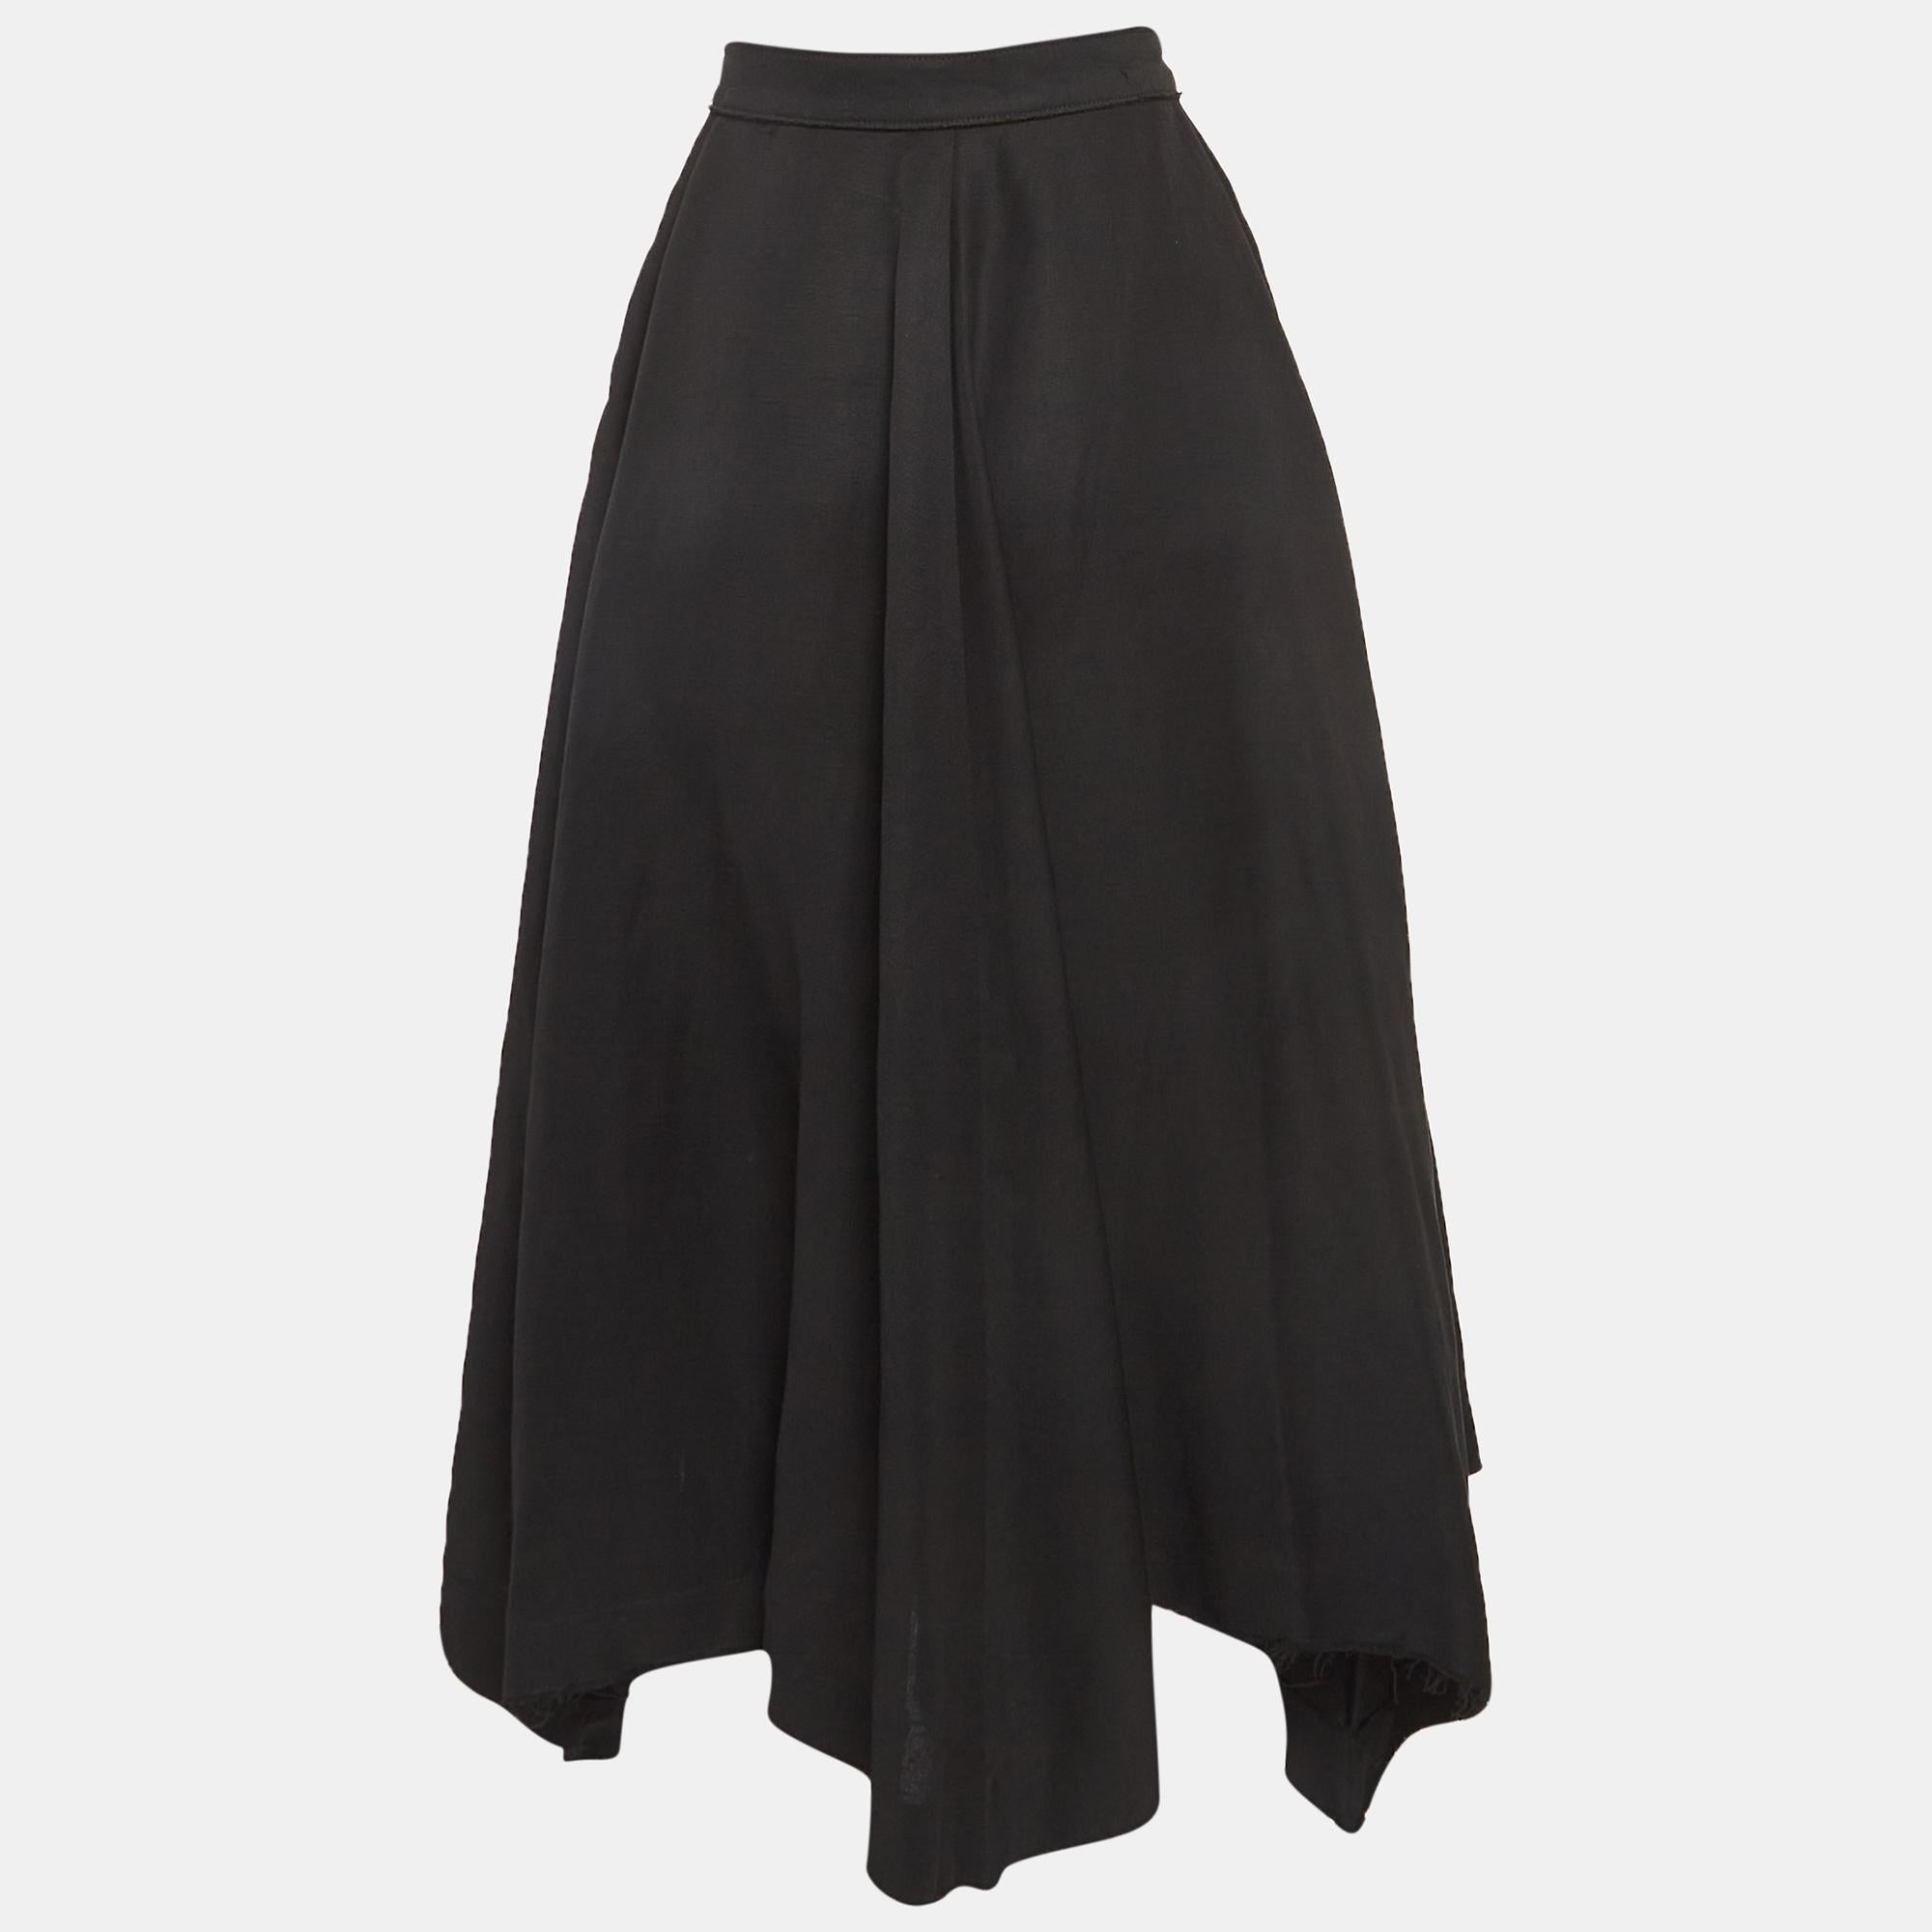 Experience the charm of designer clothing with this gorgeous skirt. Made from quality fabrics, the skirt has a simple allure and a great fit. Pair it up with a tailored blouse or a simple top and high heels.

Includes: Brand Tag